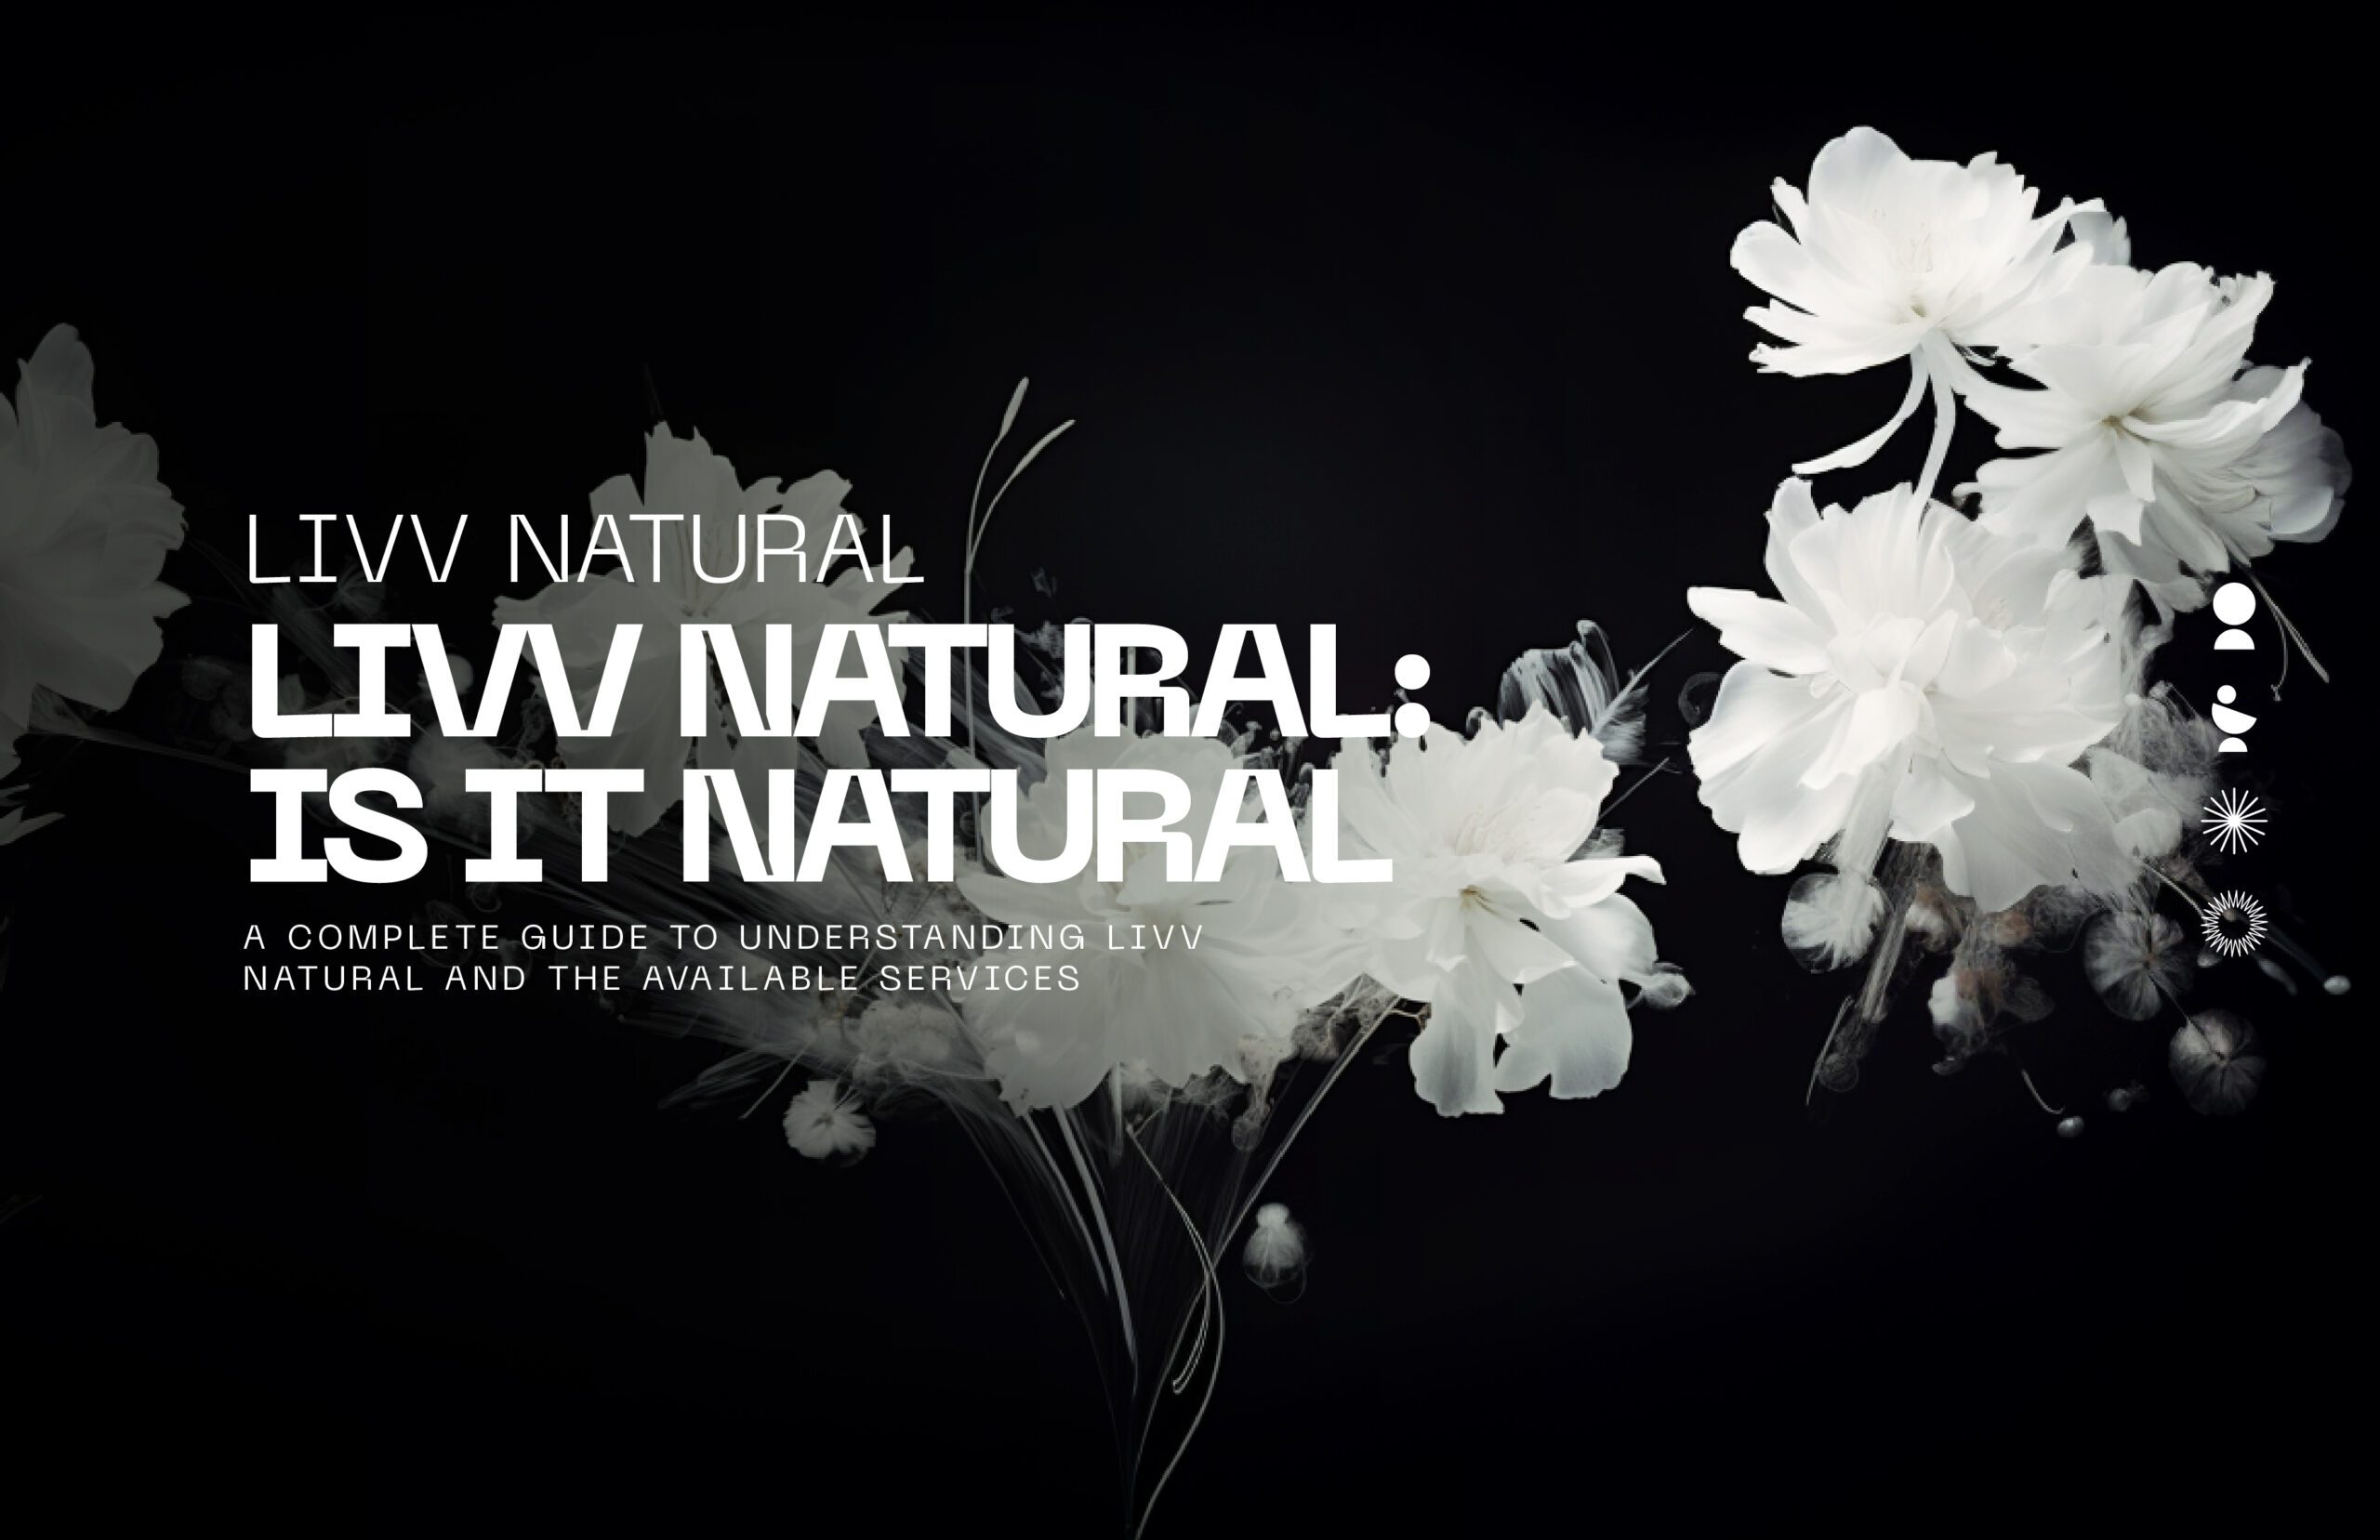 LIVV Natural – but is it natural?